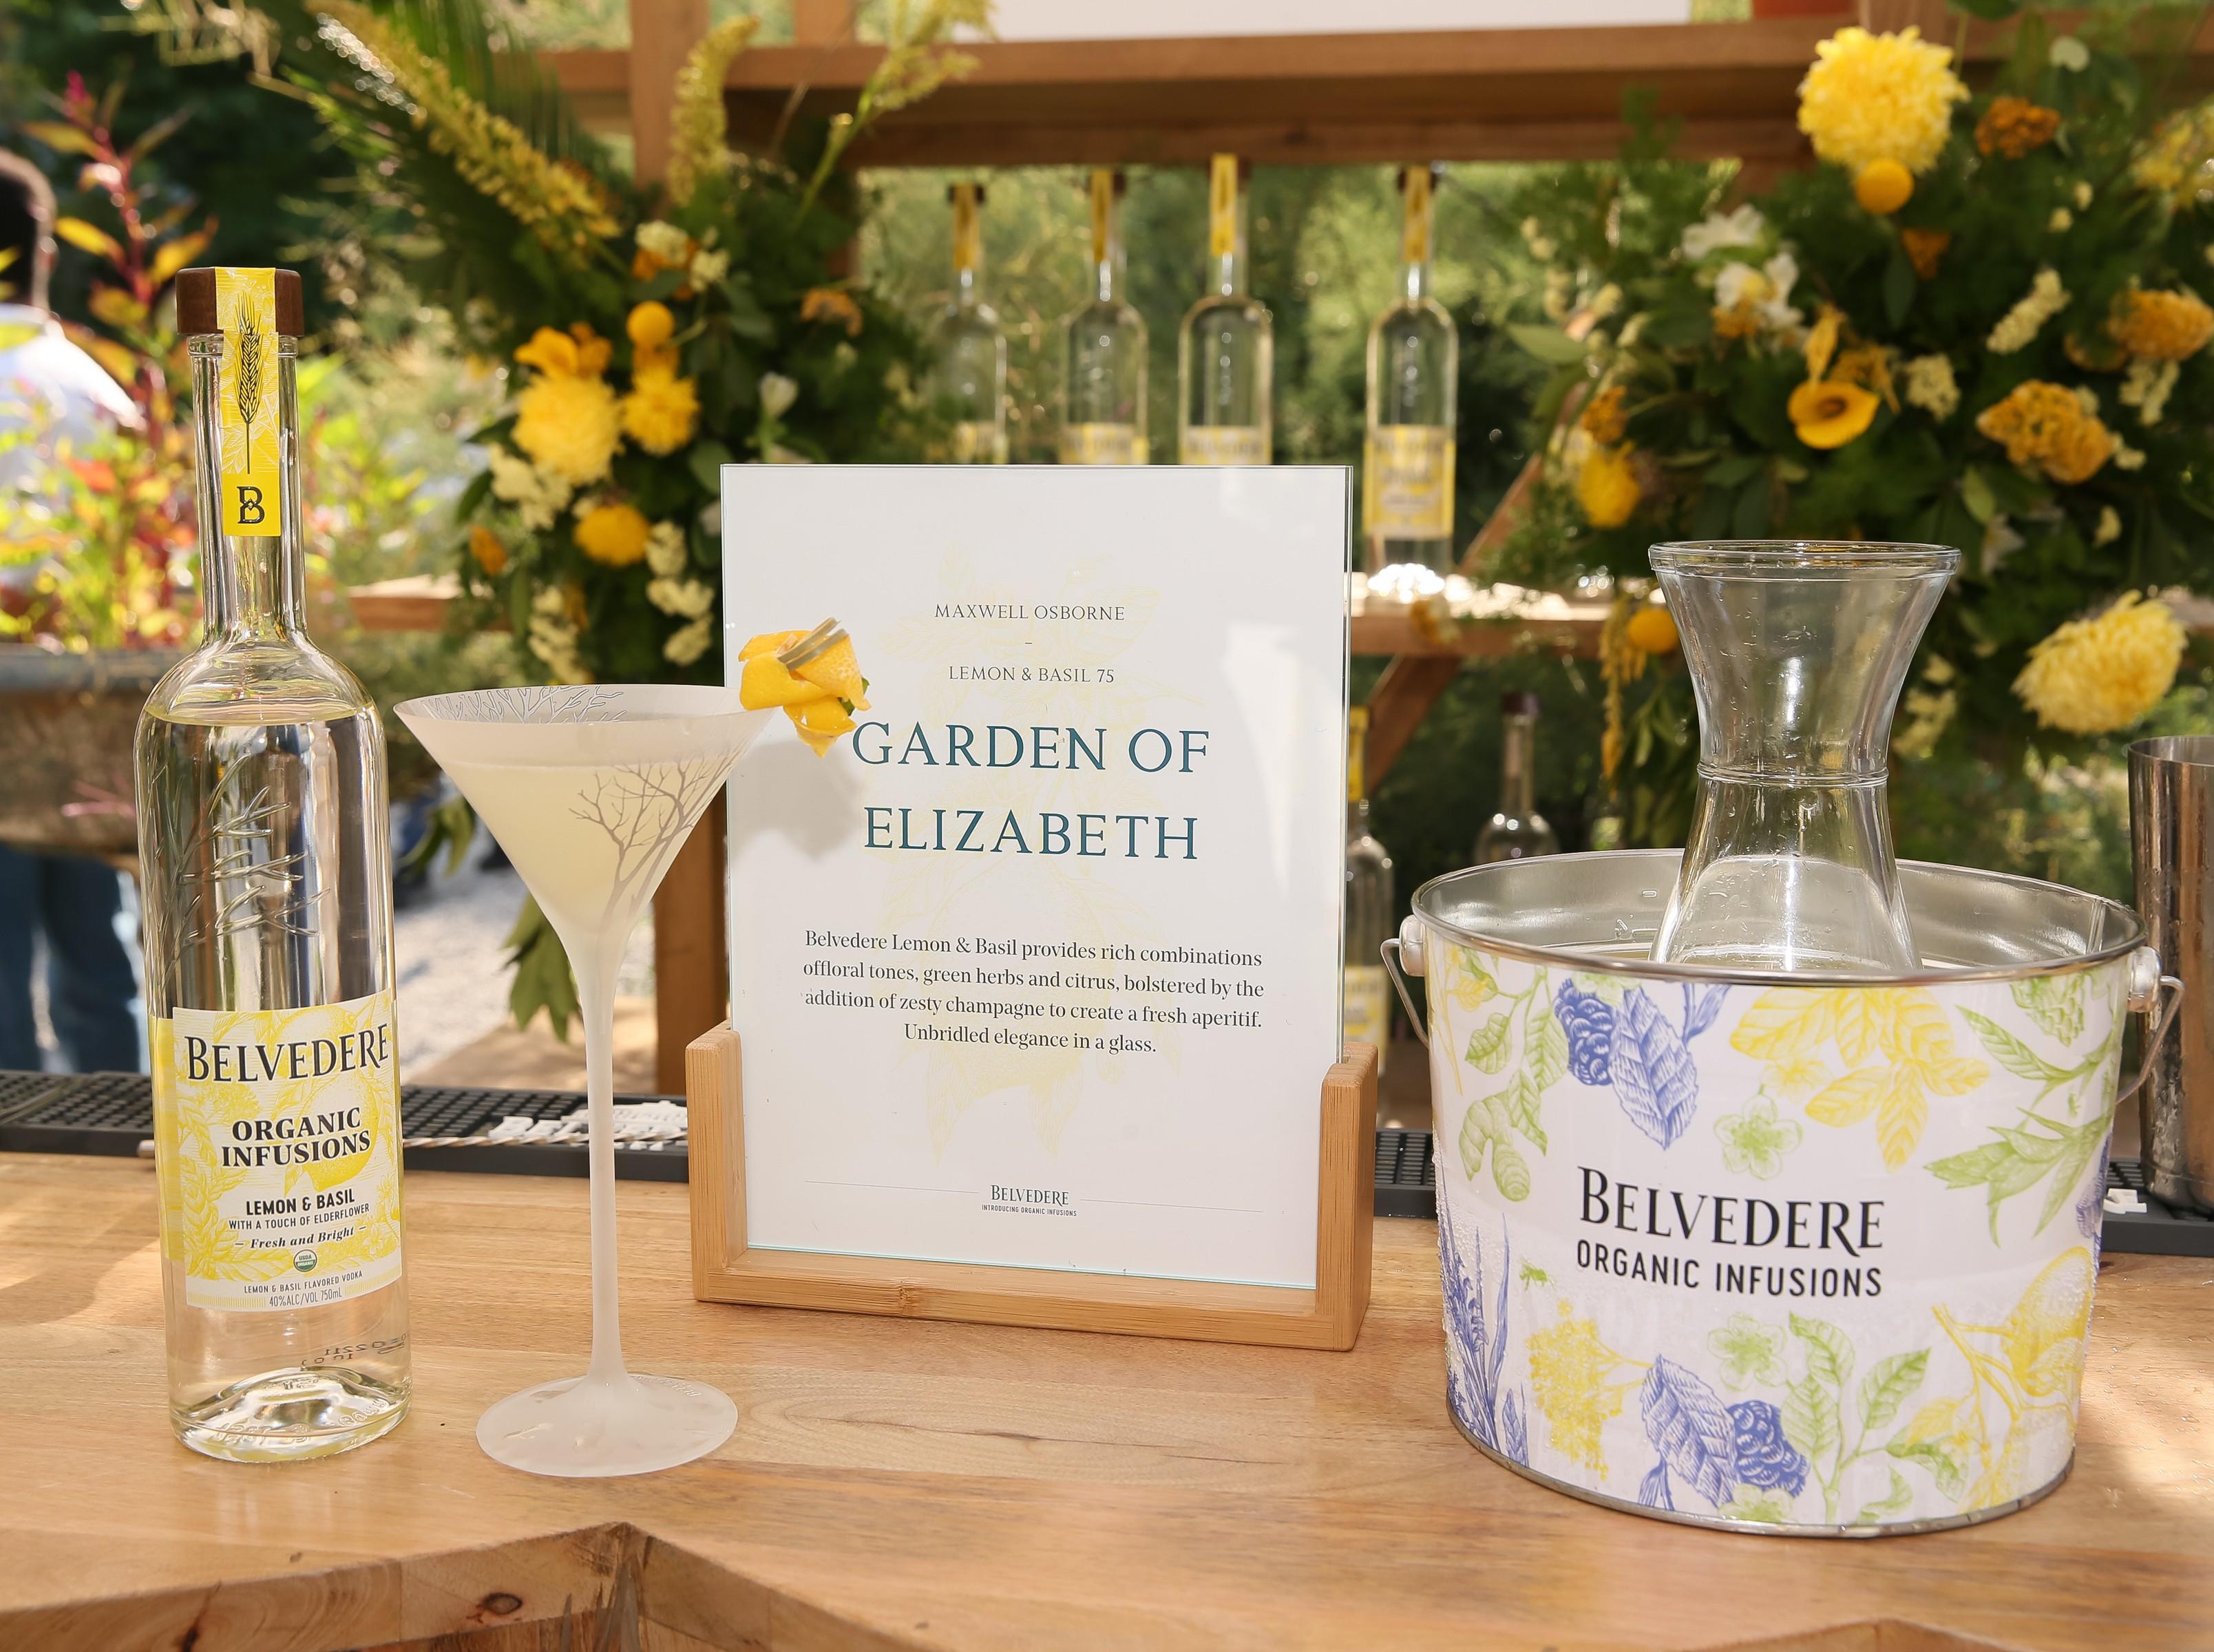 How to Serve Belvedere Organic Infusions